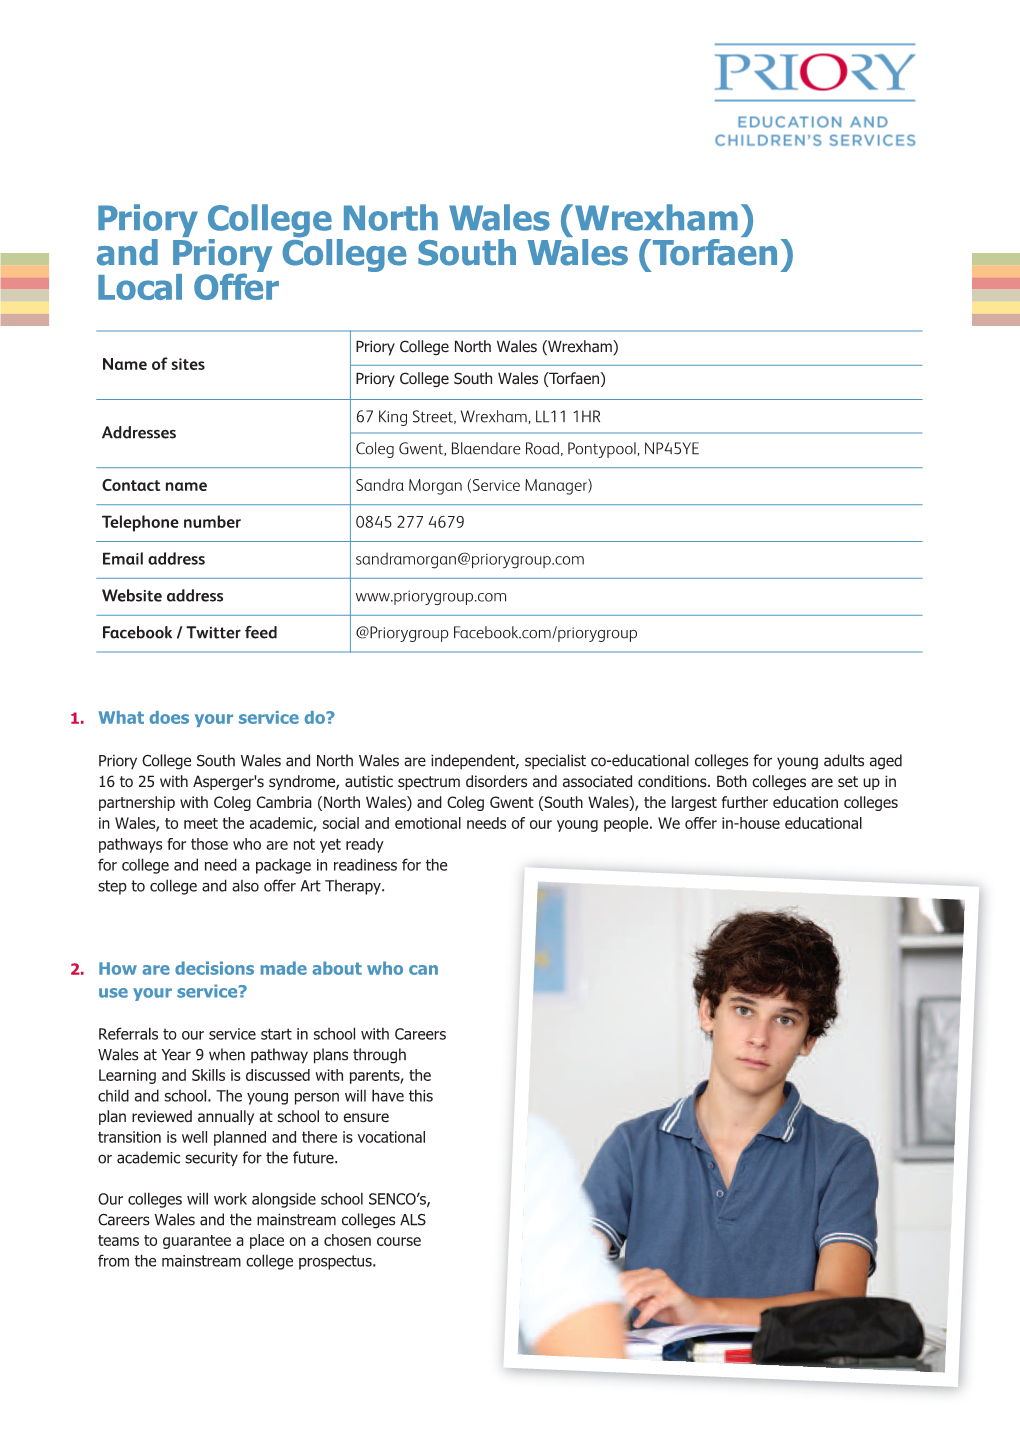 (Wrexham) and Priory College South Wales (Torfaen) Local Offer